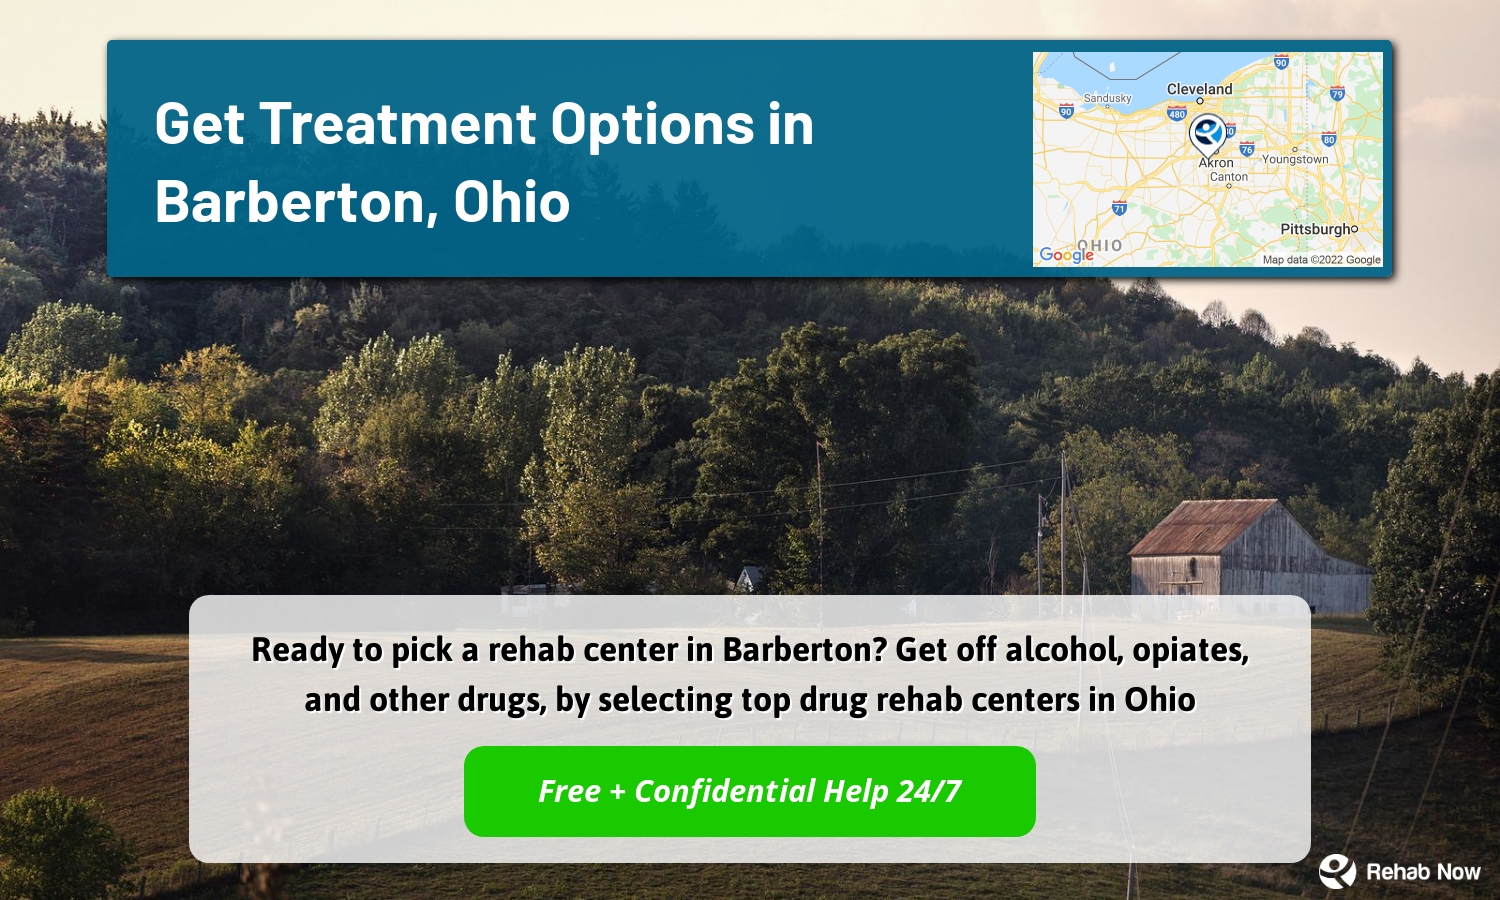 Ready to pick a rehab center in Barberton? Get off alcohol, opiates, and other drugs, by selecting top drug rehab centers in Ohio